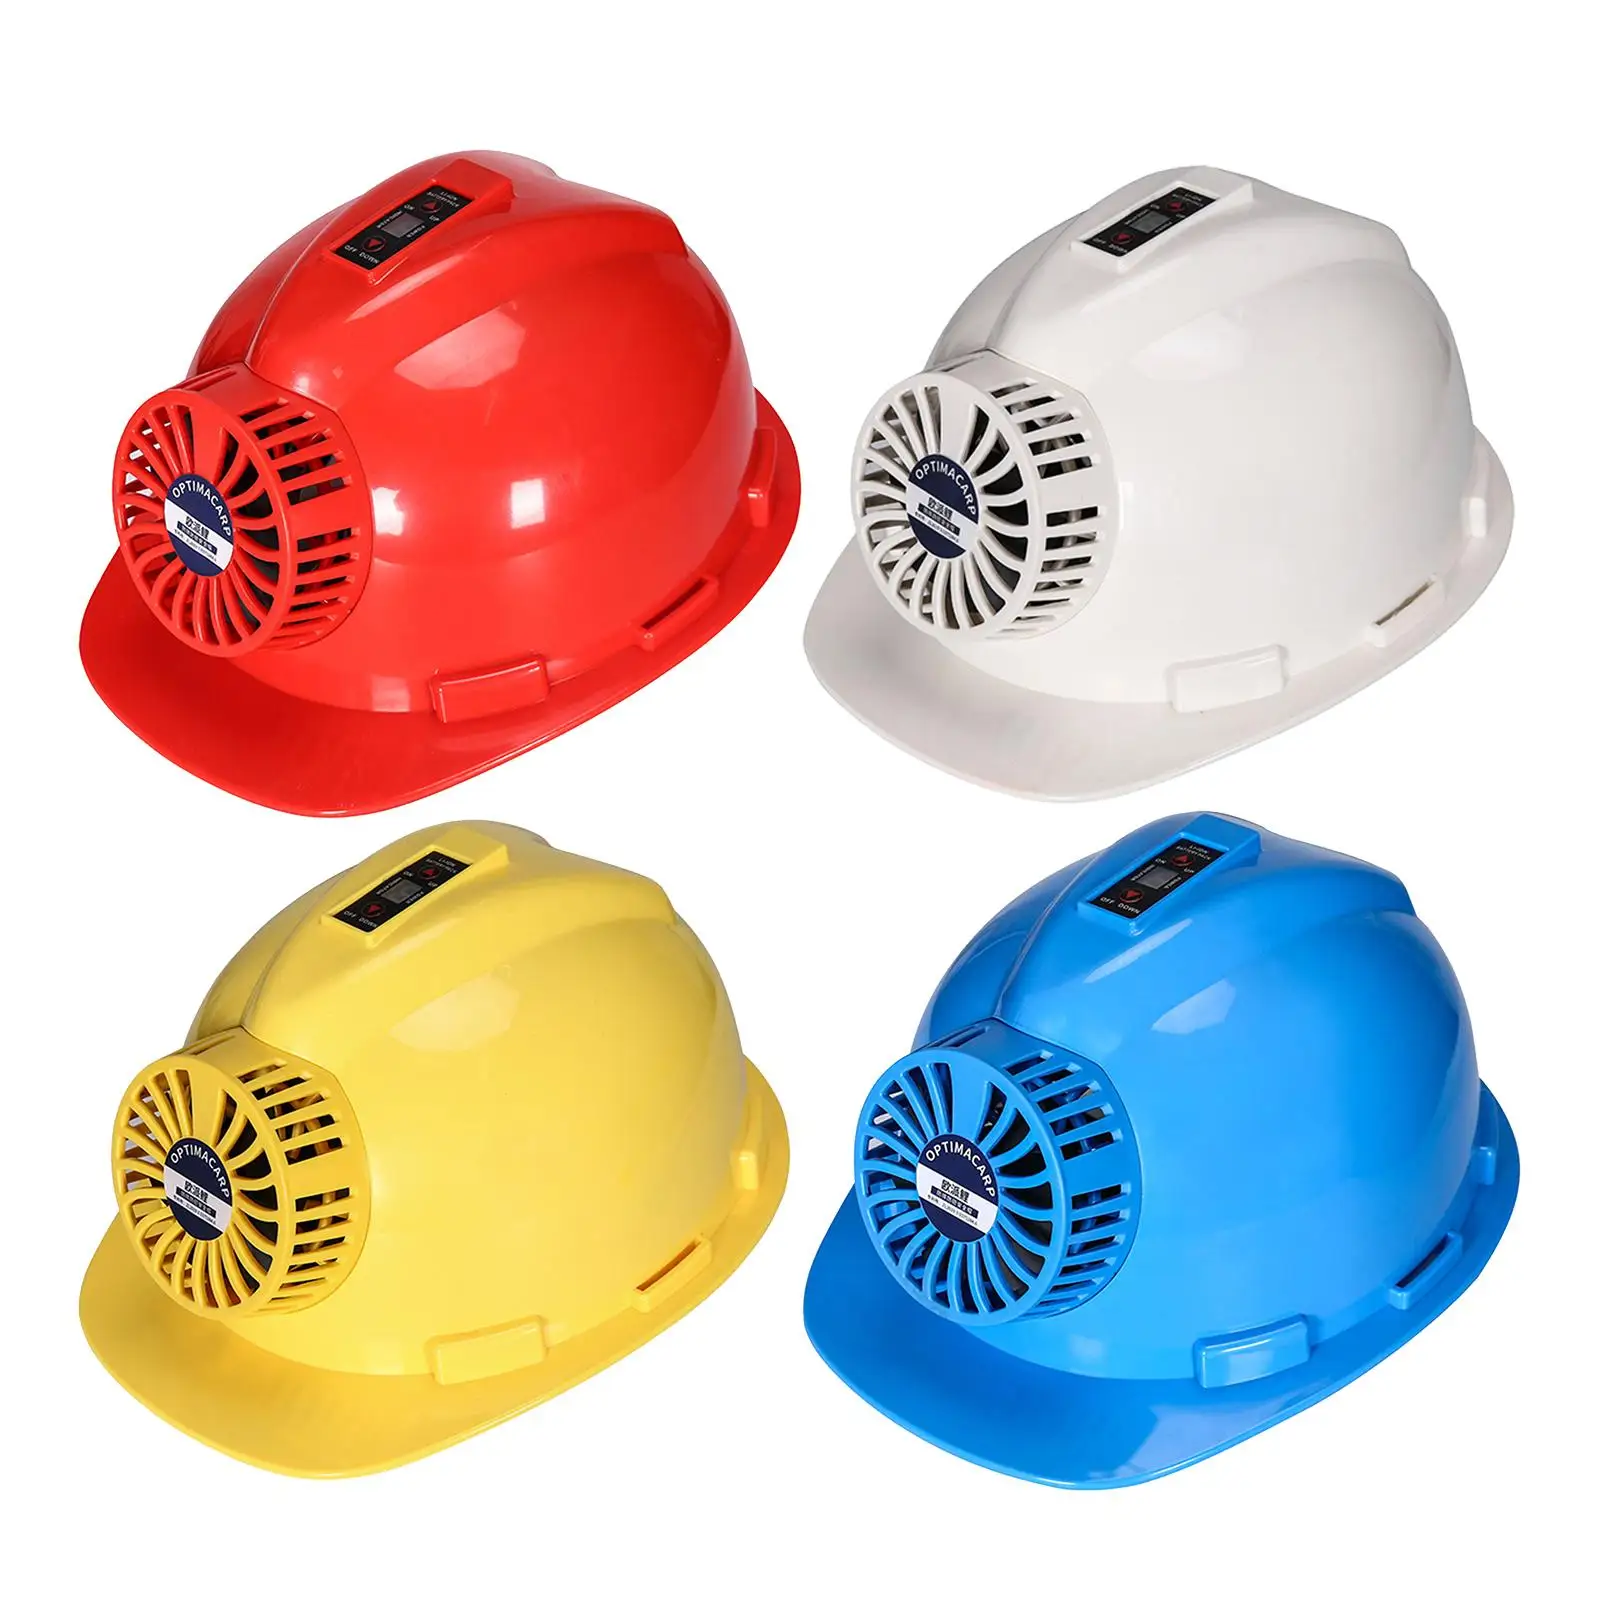 Construction Hard Hat with Fan 4 Speeds Adjustment Charging Workplace Thickening Summer Outdoor Working Sunshade Protective Cap